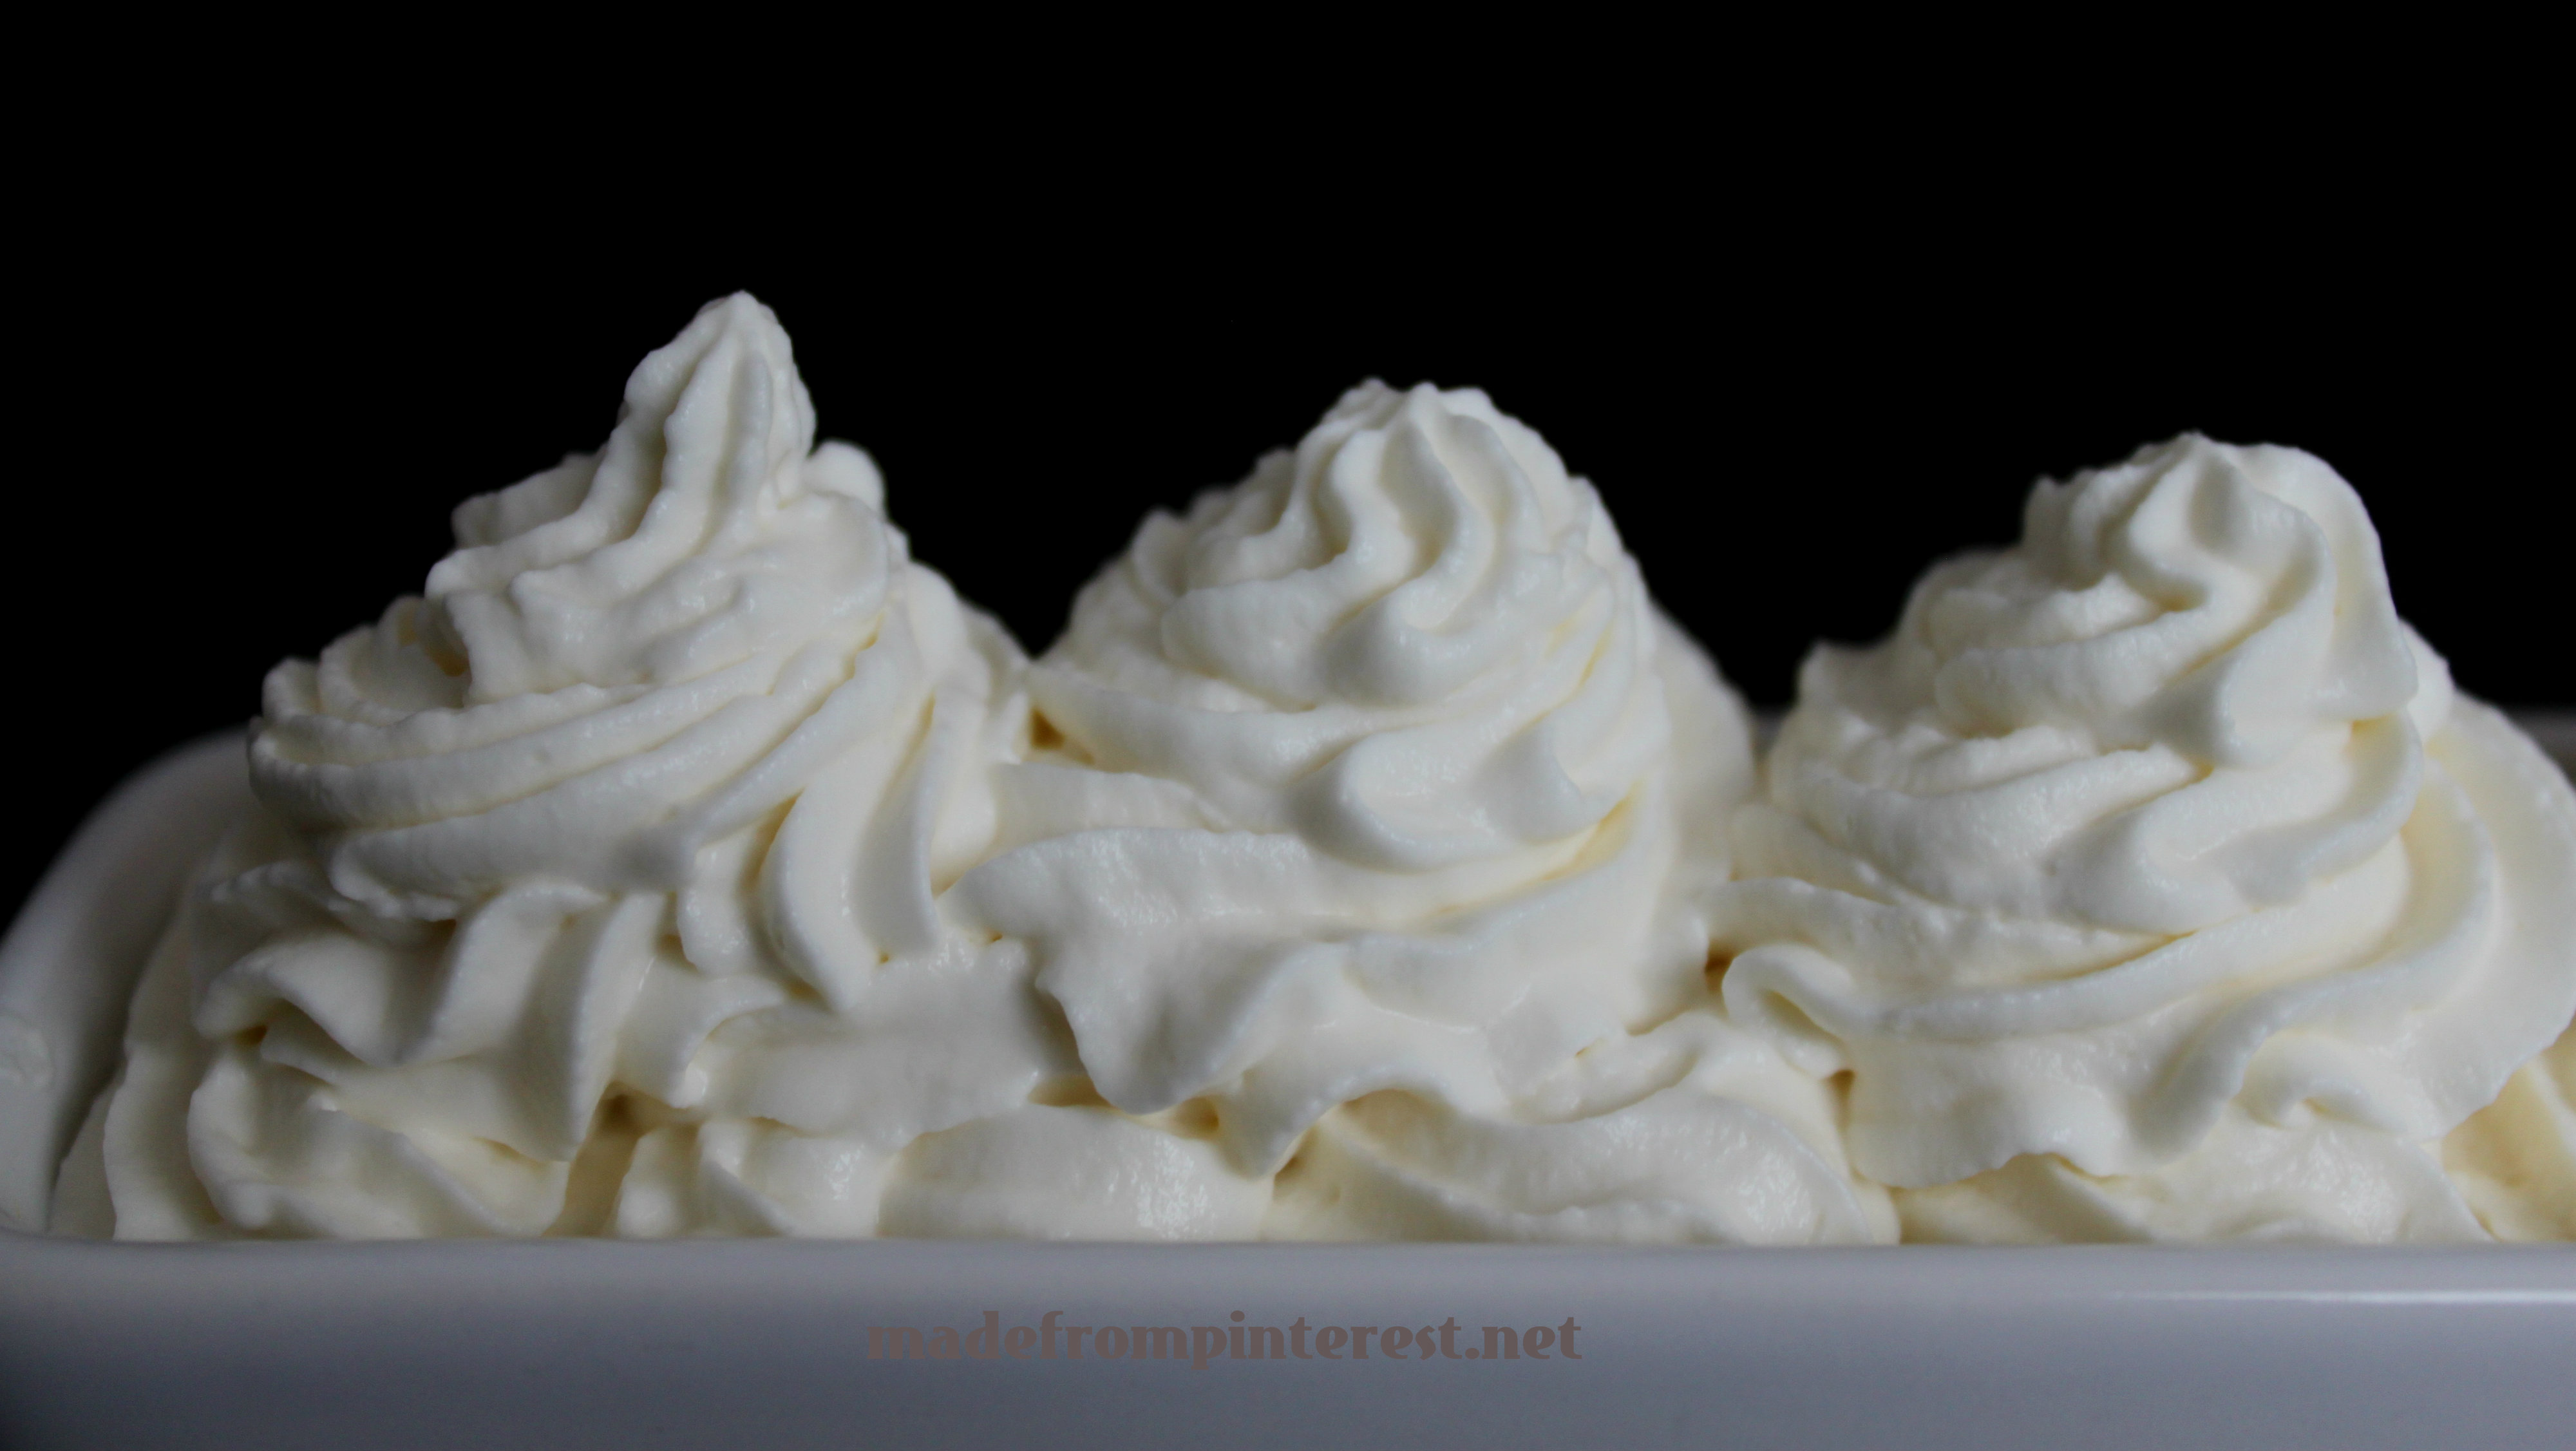 Stabilized whipped cream for peaks that last for a week by madefrompinterest.net